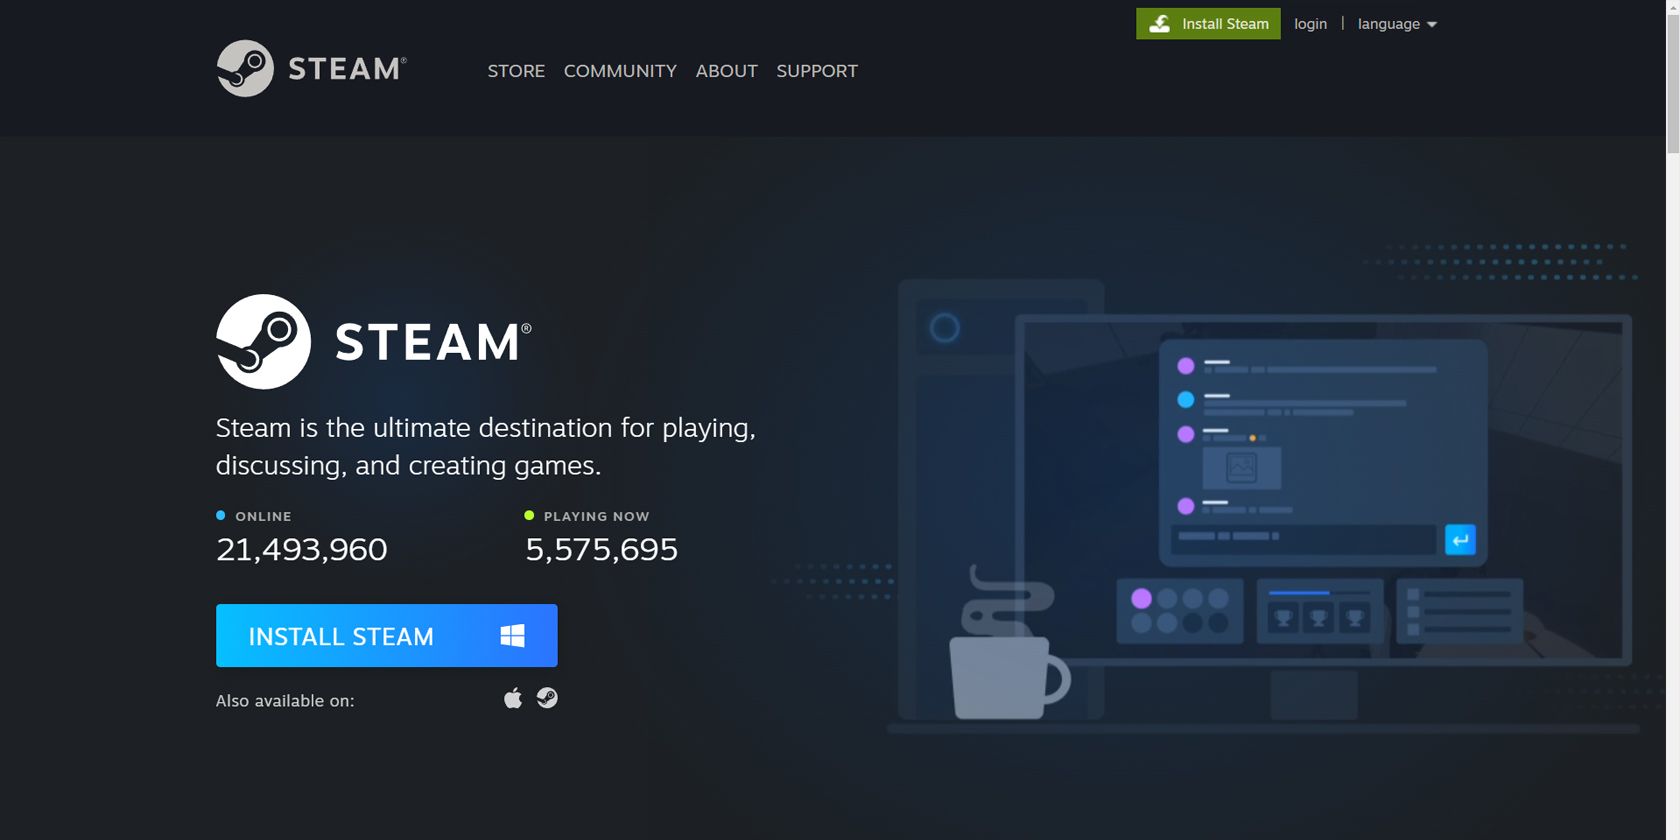 screenshot of Install Steam page